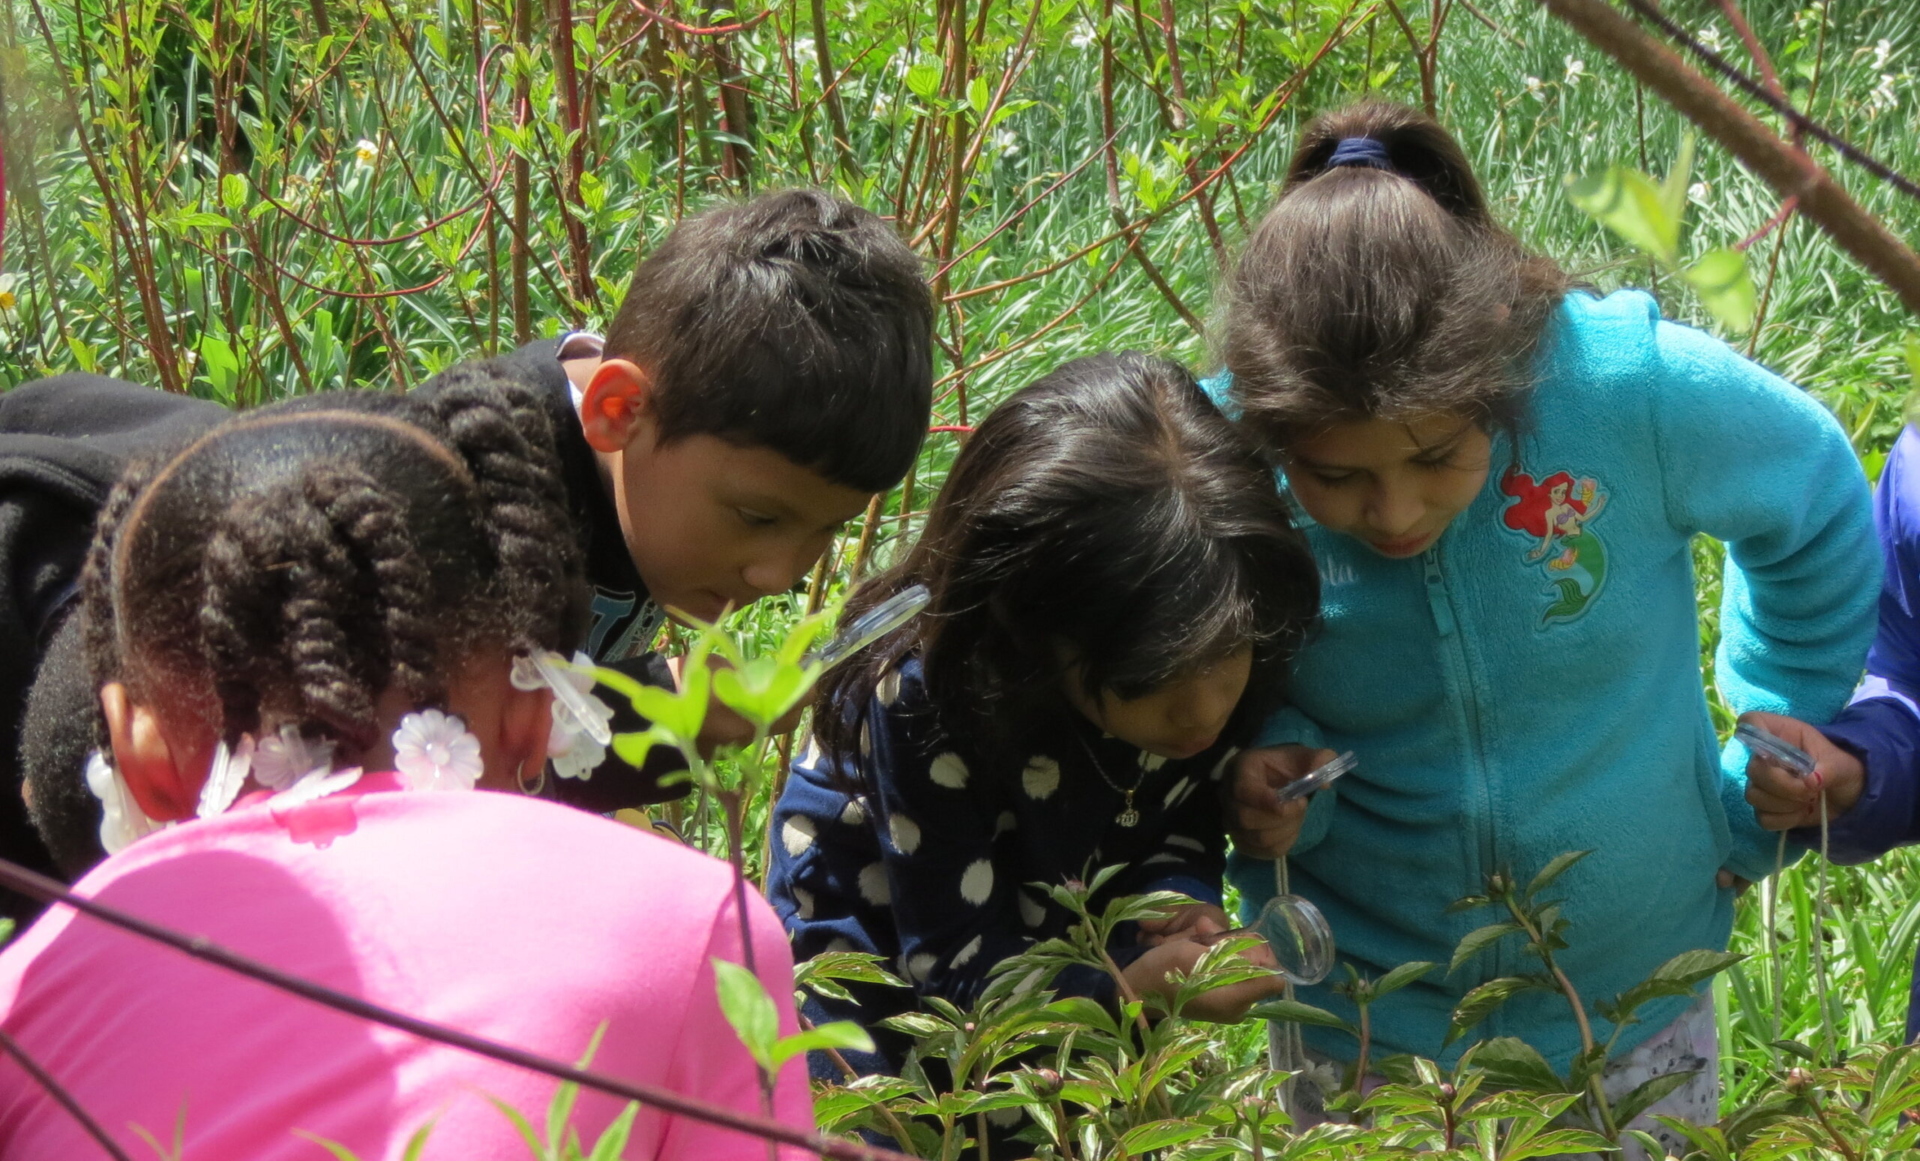 A group of kids observing plants outside with handheld magnifying glasses.